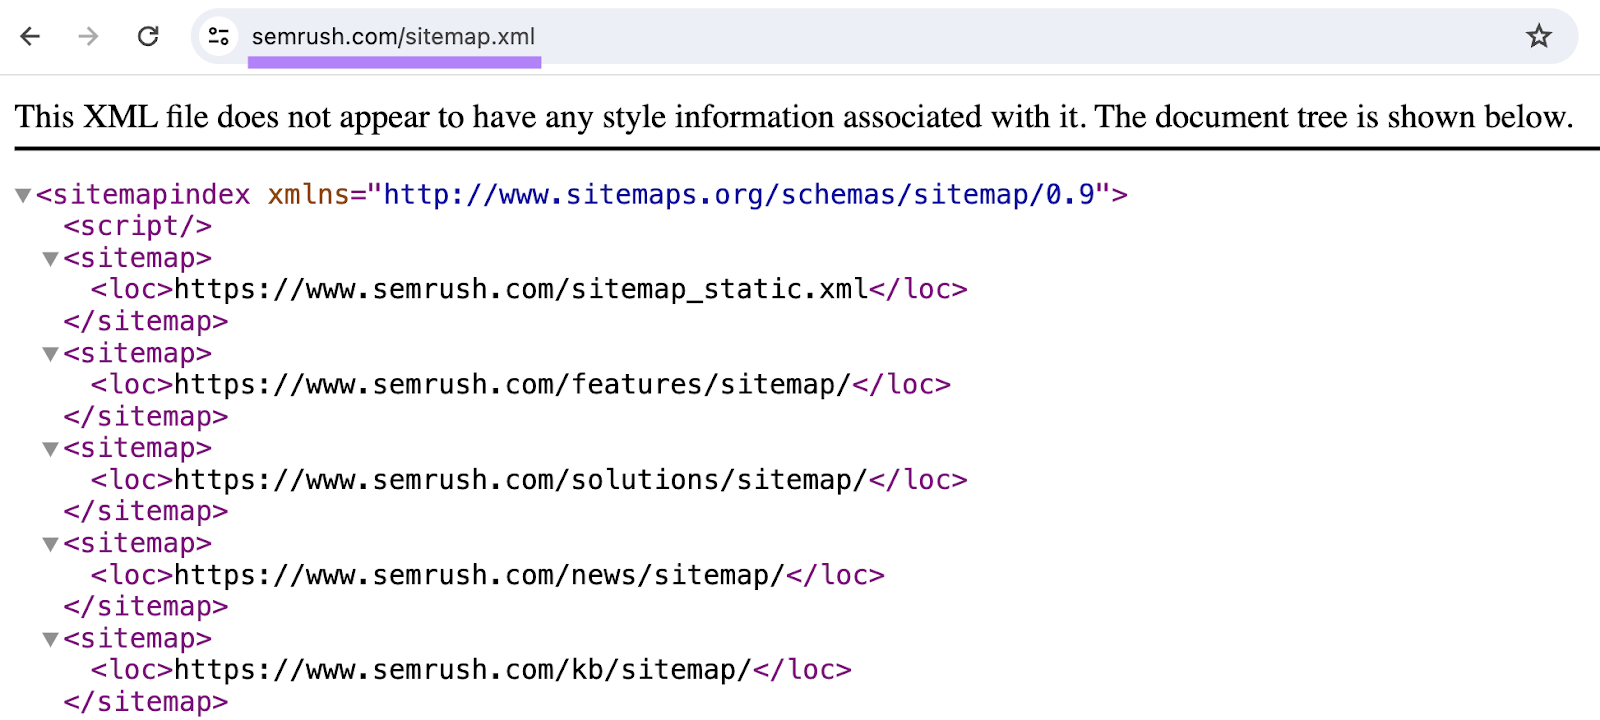 The webpage for semrush.com/sitemap.xml showing an XML sitemap